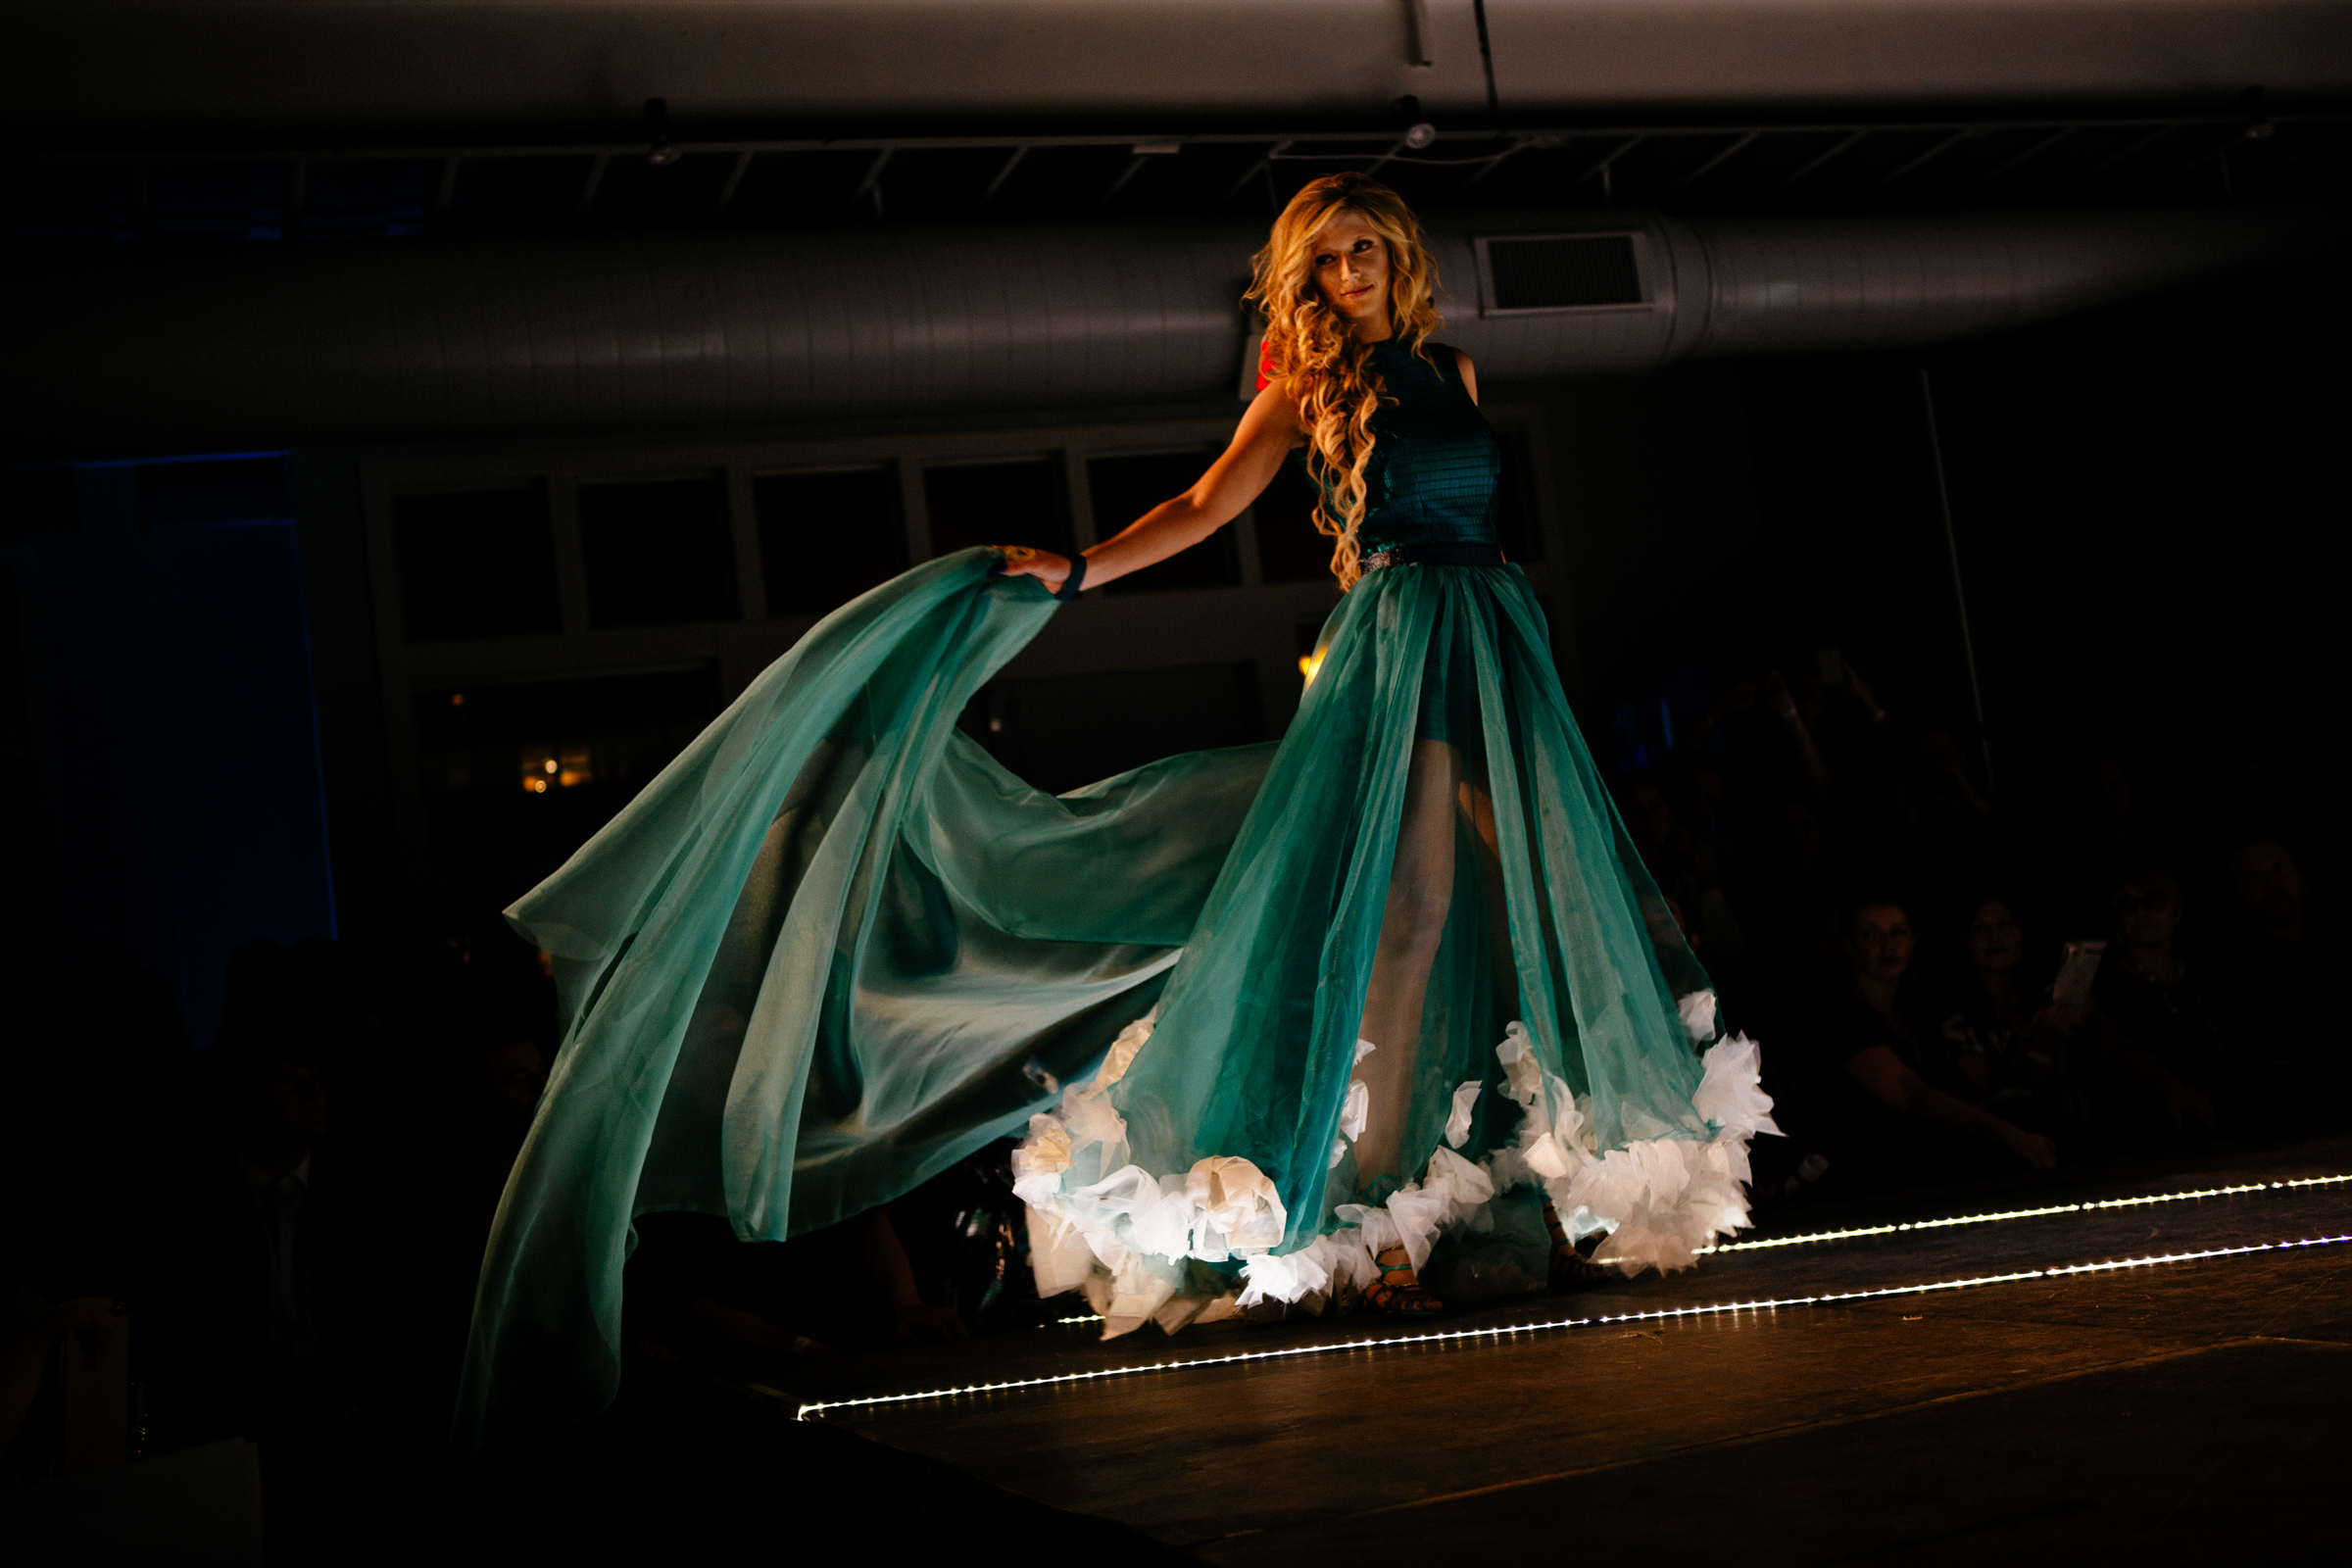 NewStudio Architecture created a flowing ensemble from building and interior design materials for the IIDA Fusion + Fashion fundraiser